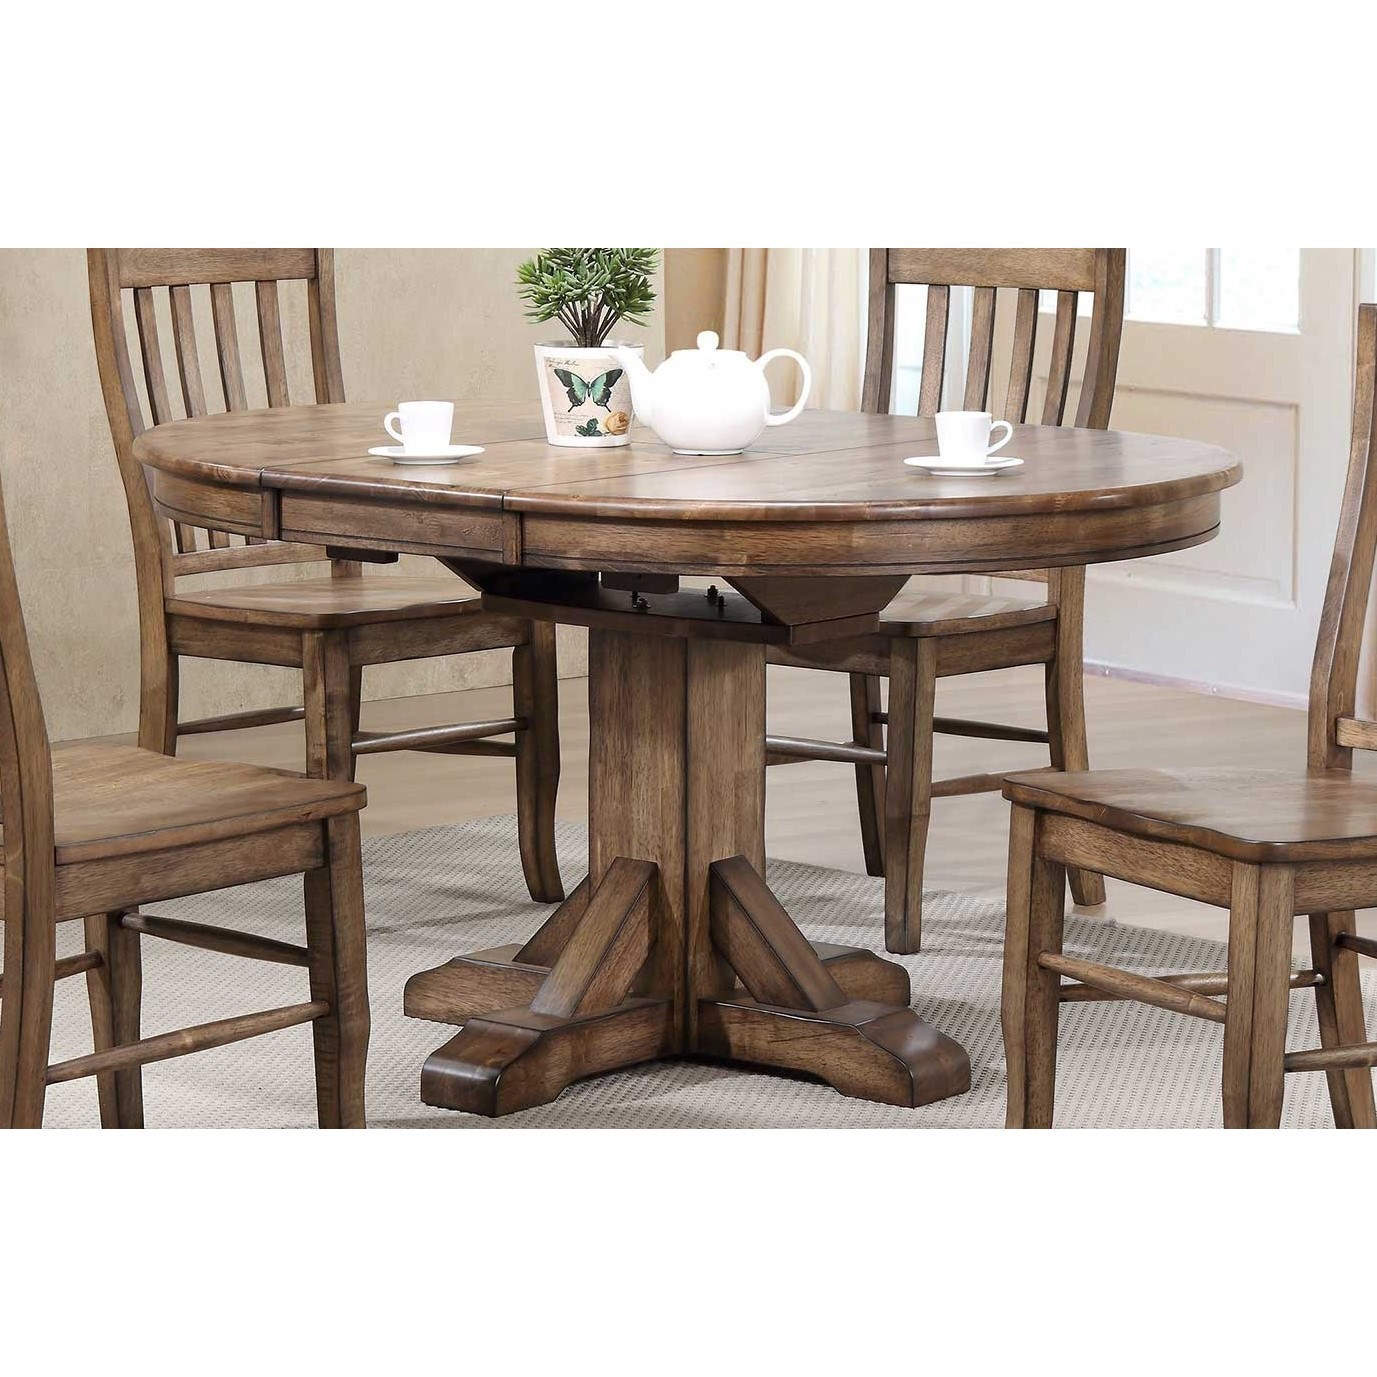 Winners Only Carmel Dc34257r 57 Pedestal Table W 15 within sizing 1377 X 1377